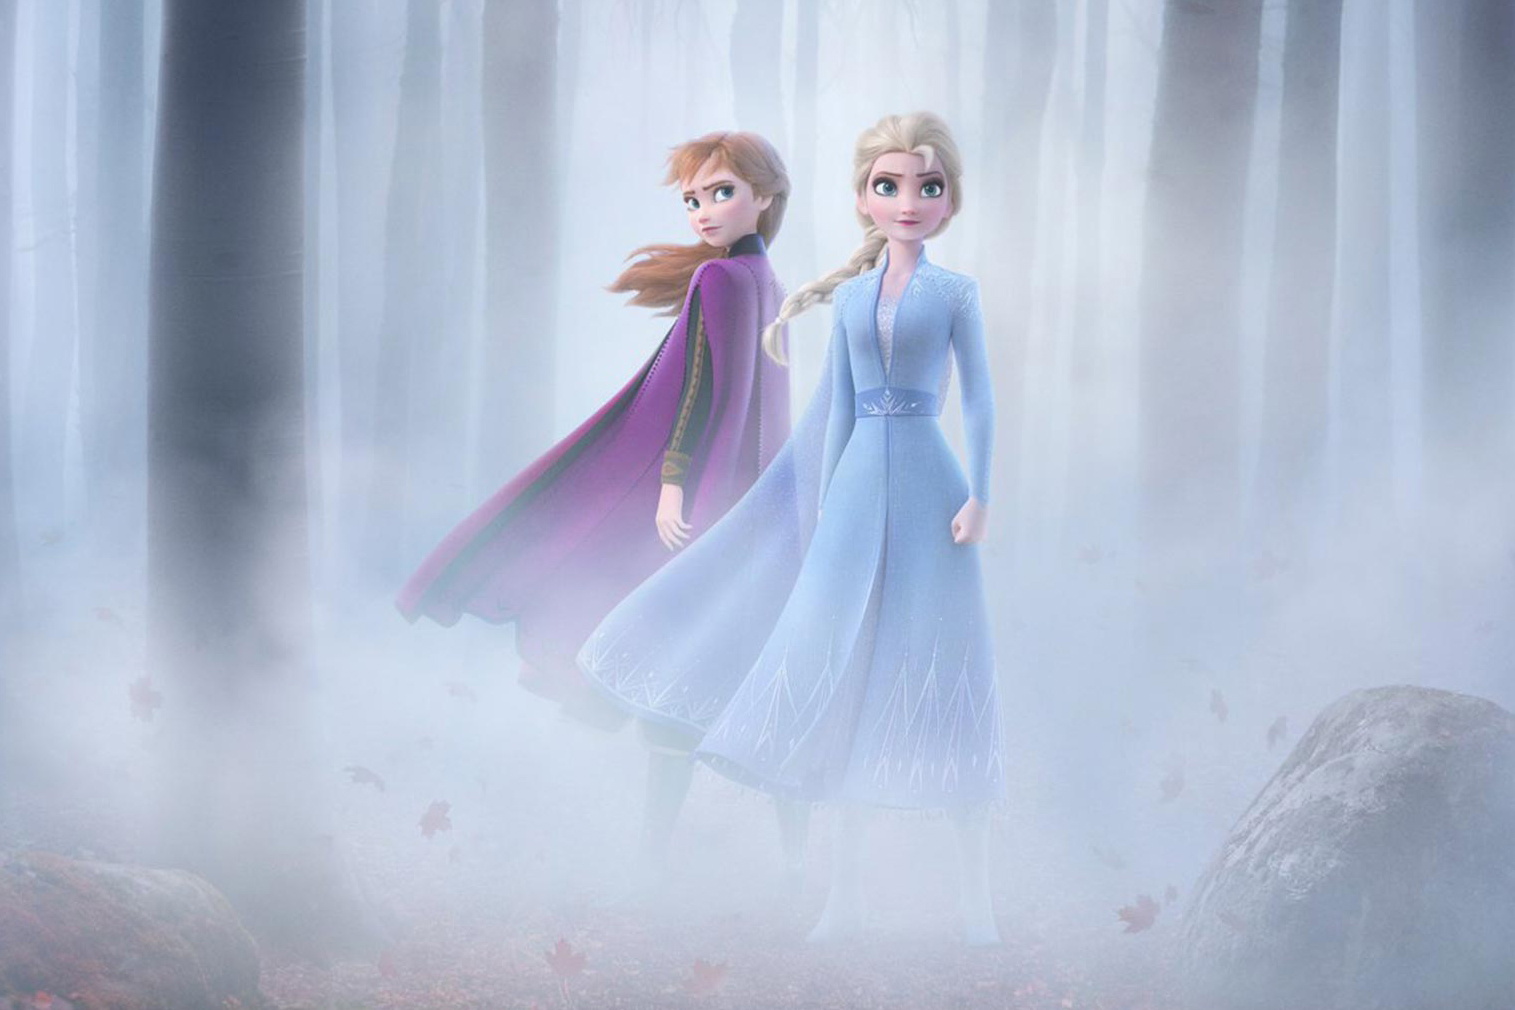 Anna and Elsa stand in the Enchanted Forest, surrounded by mist.